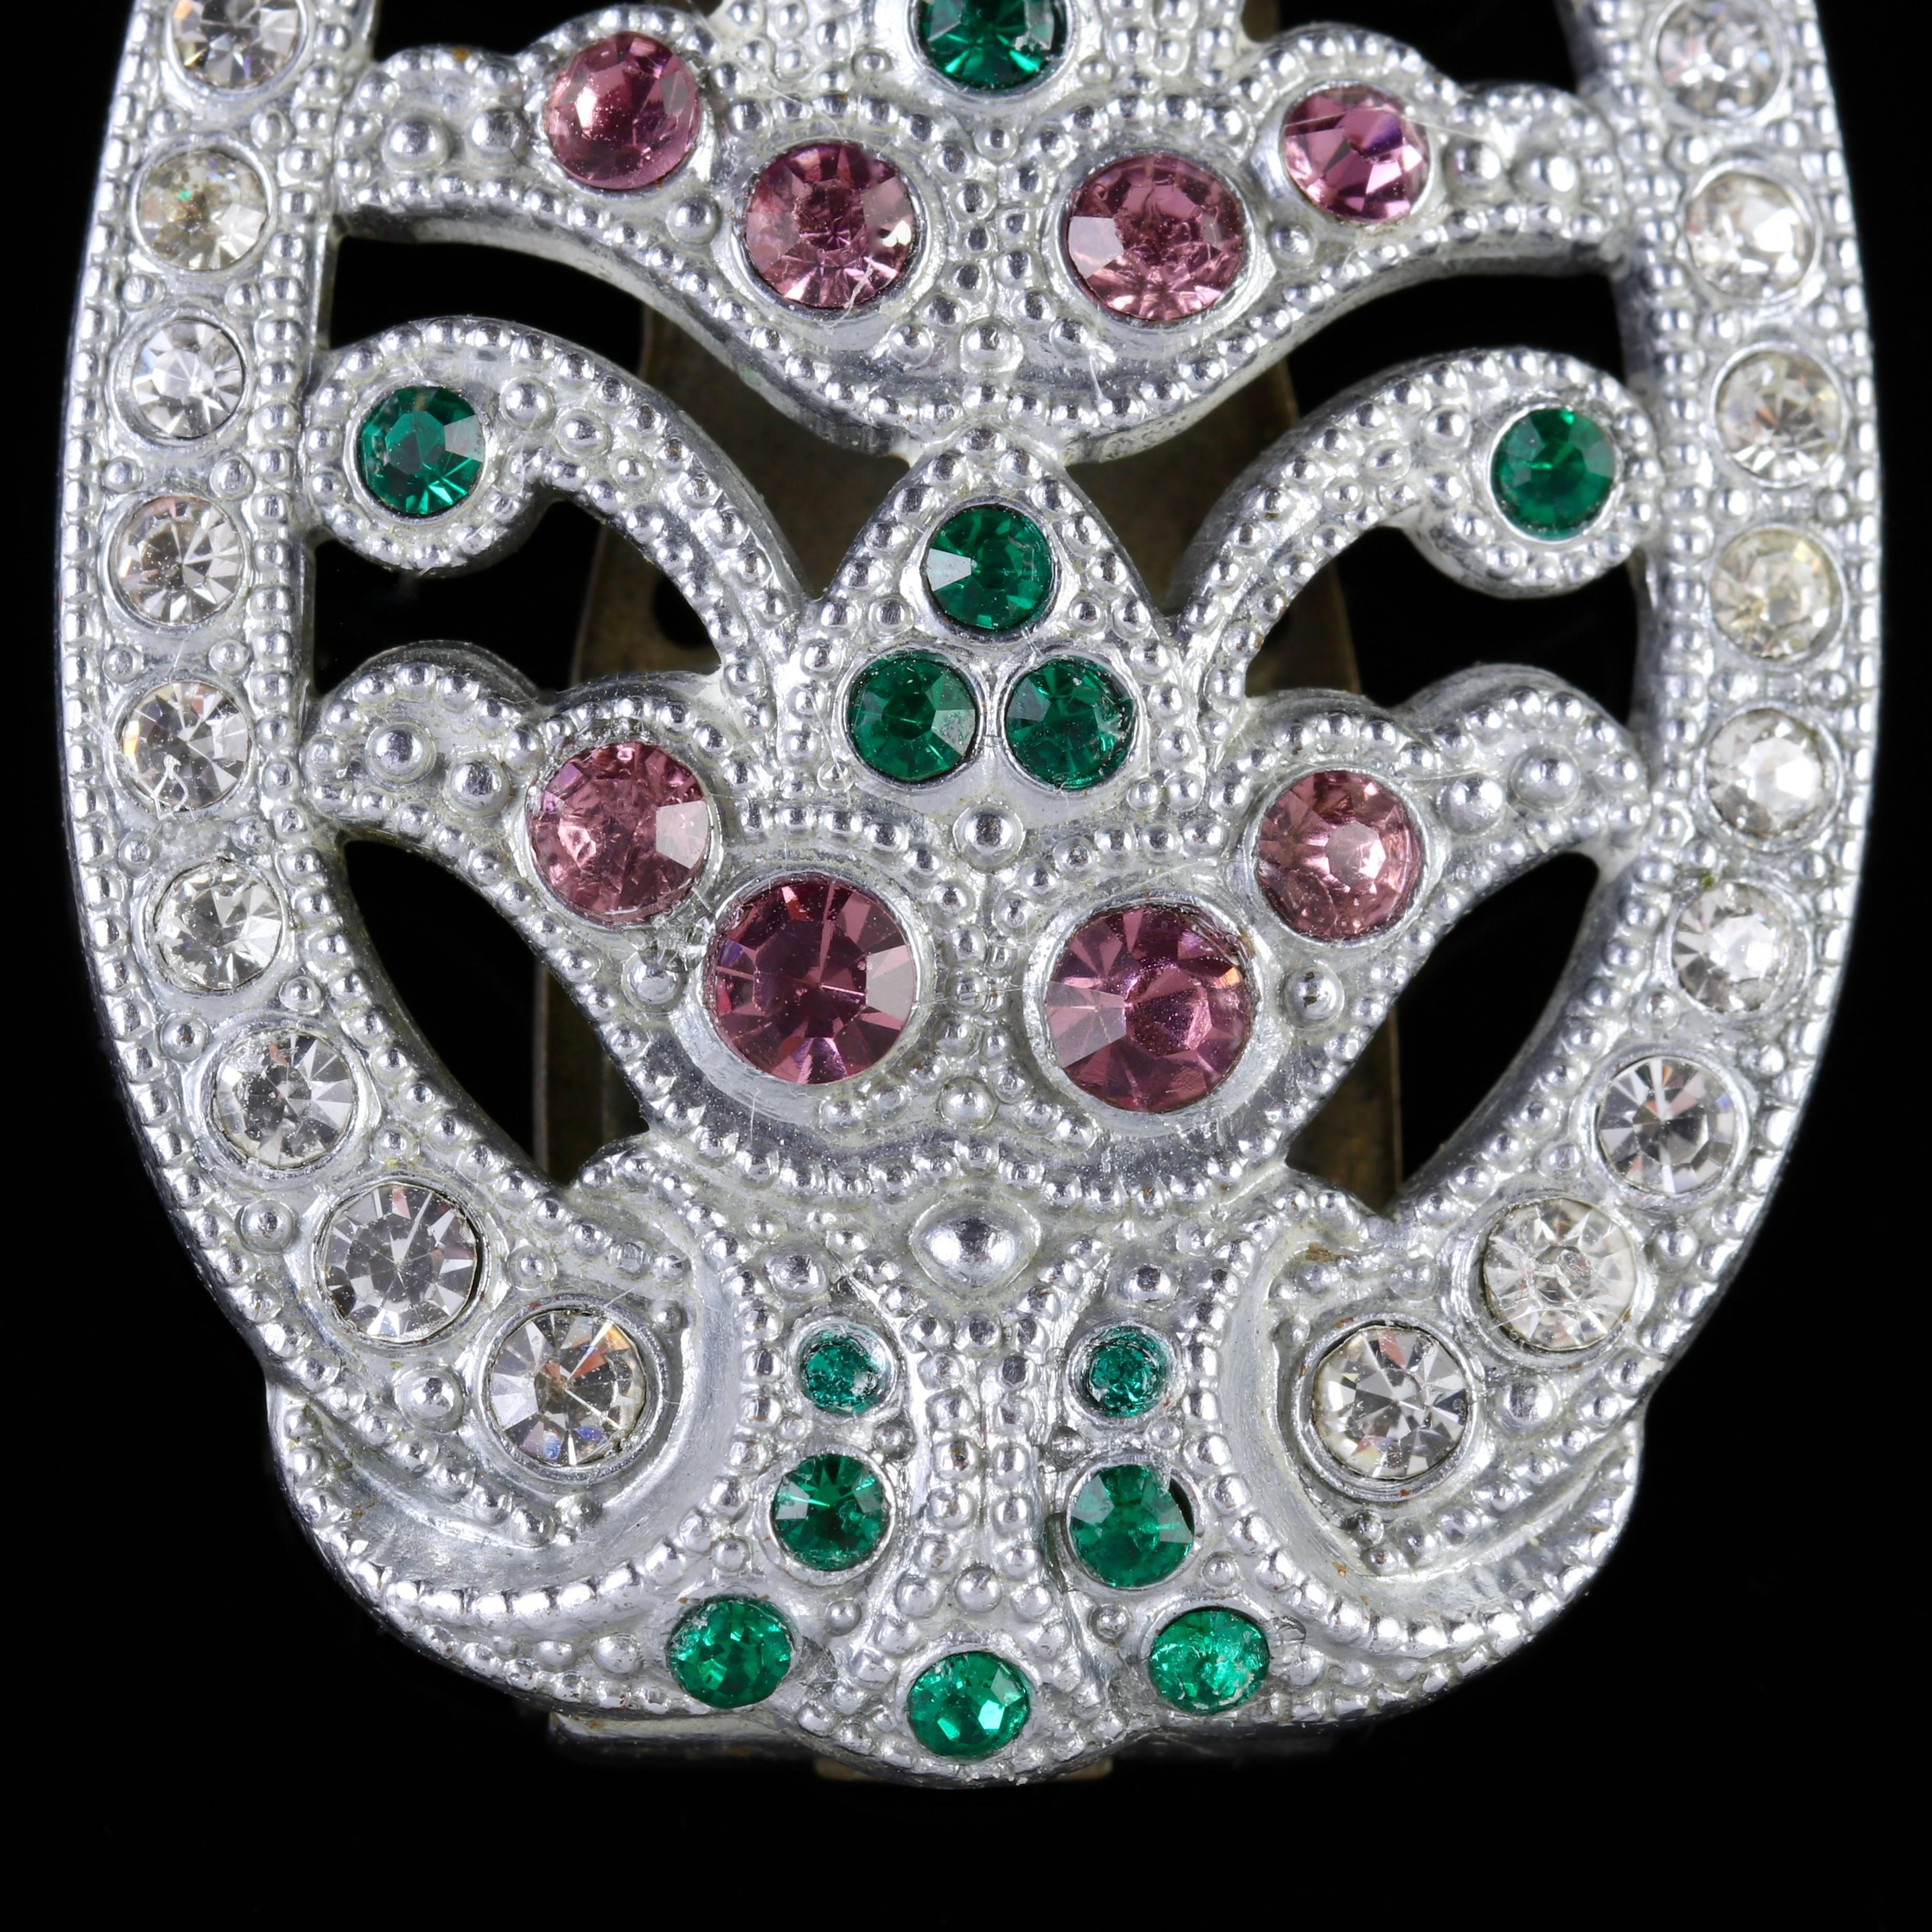 To read more please click continue reading below-

This fabulous antique Victorian Lapel Clip is made in the Suffragette style, Circa 1900. 

Emmeline Pankhurst was the leader of the British Suffragette movement in the 19th century and through her